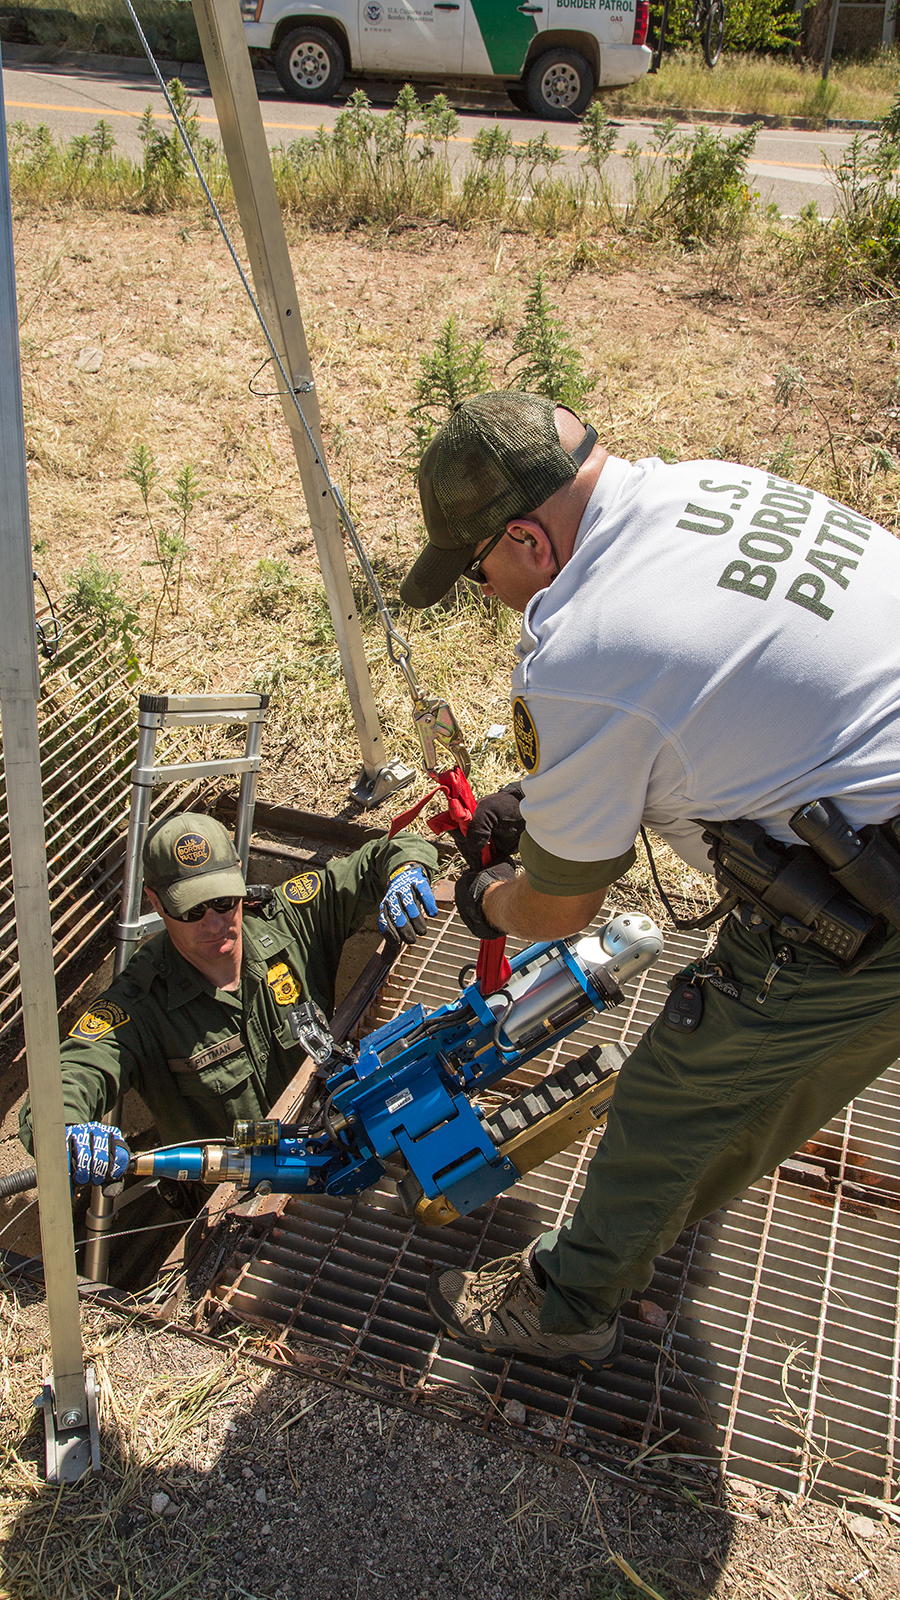 Border Patrol agents remove the robot from the drainage pipe after it completes the task.